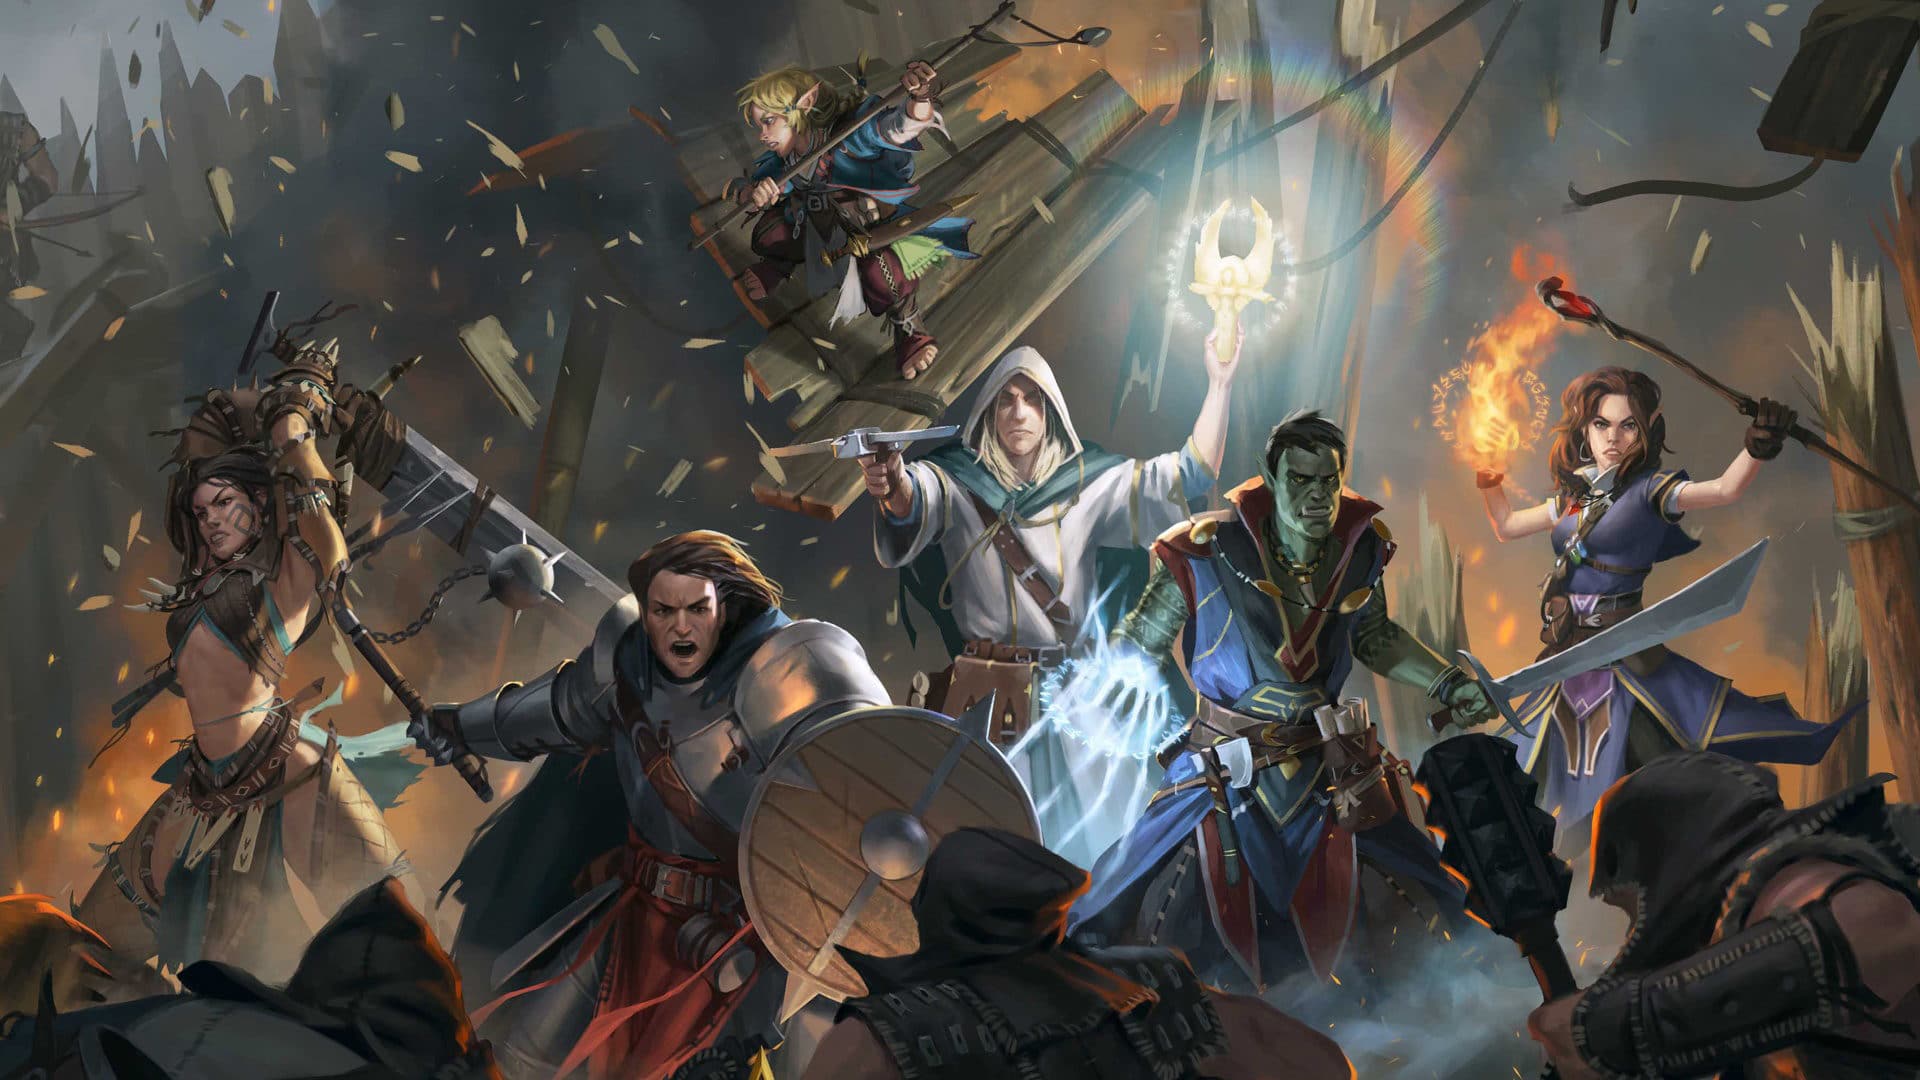 Favored Class at Pathfinder: Kingmaker Nexus - Mods and Community